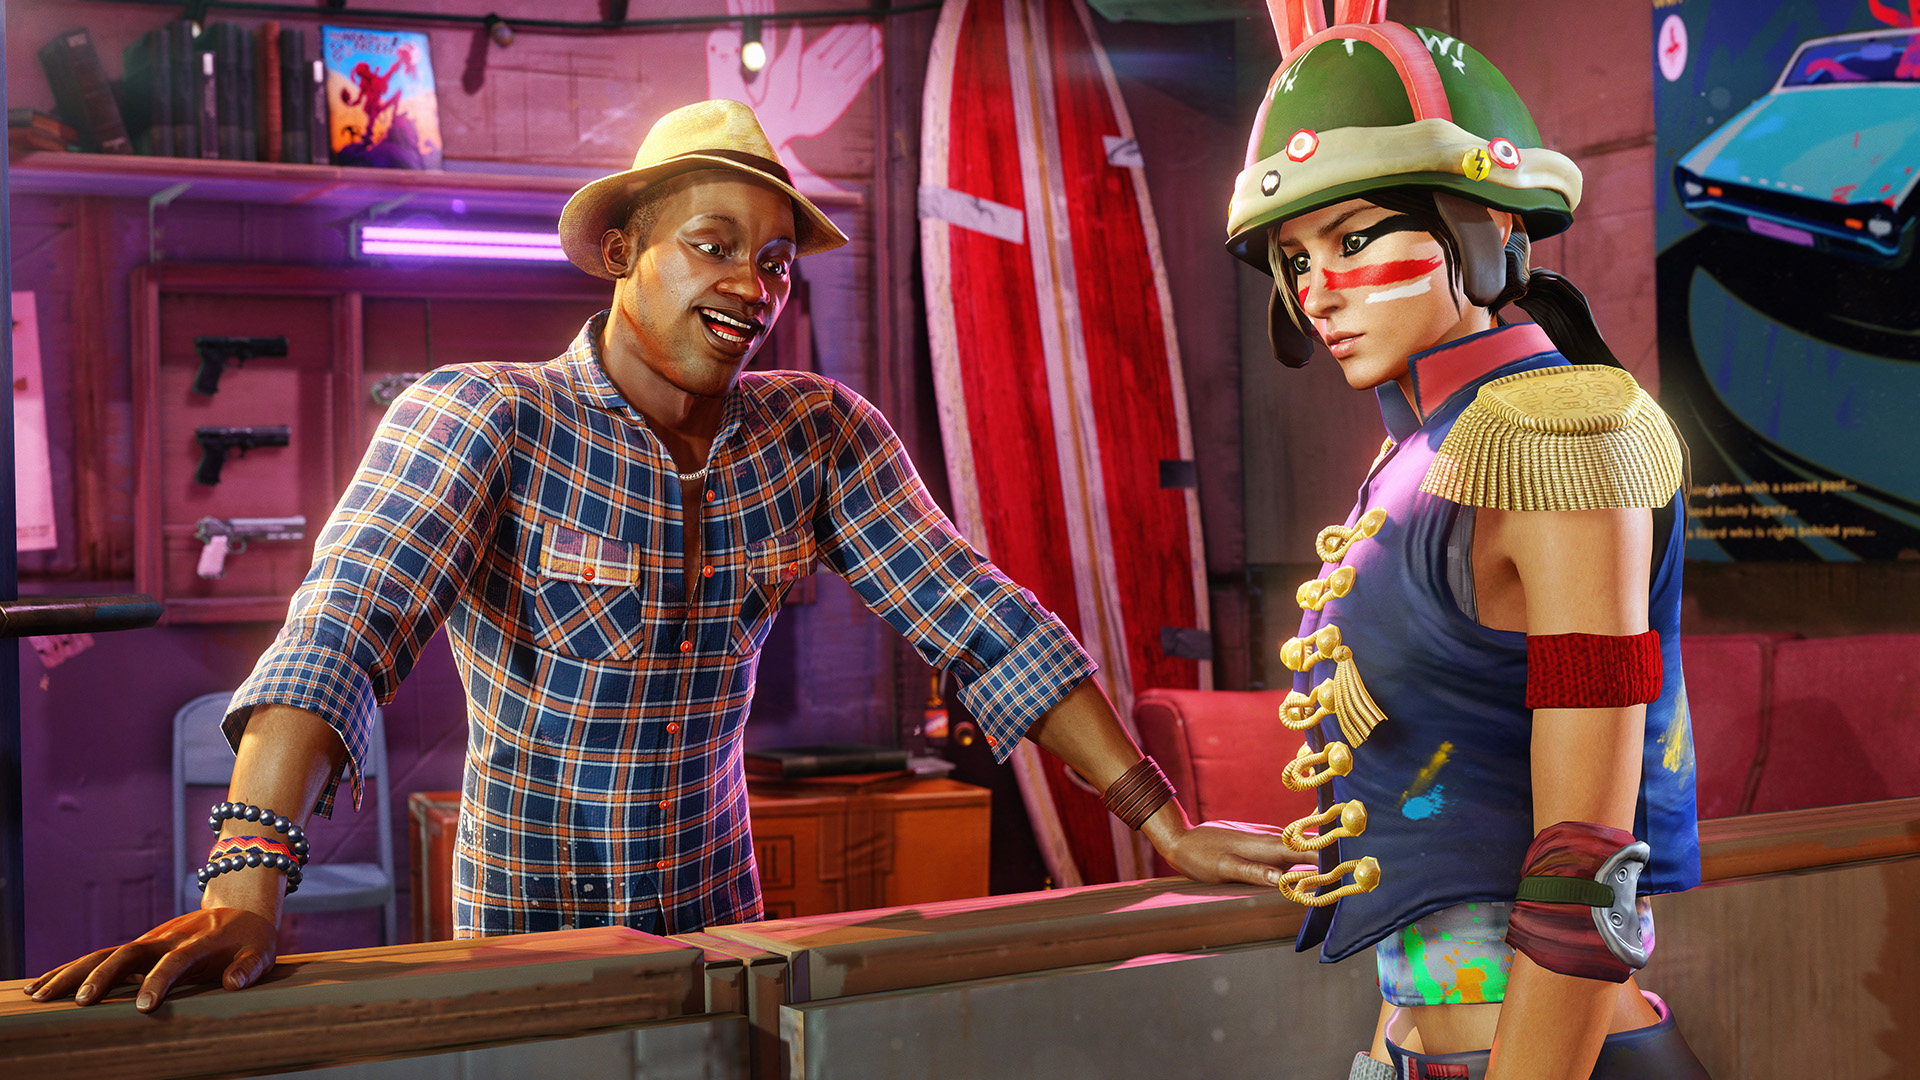 Sunset-Overdrive-Review-P6